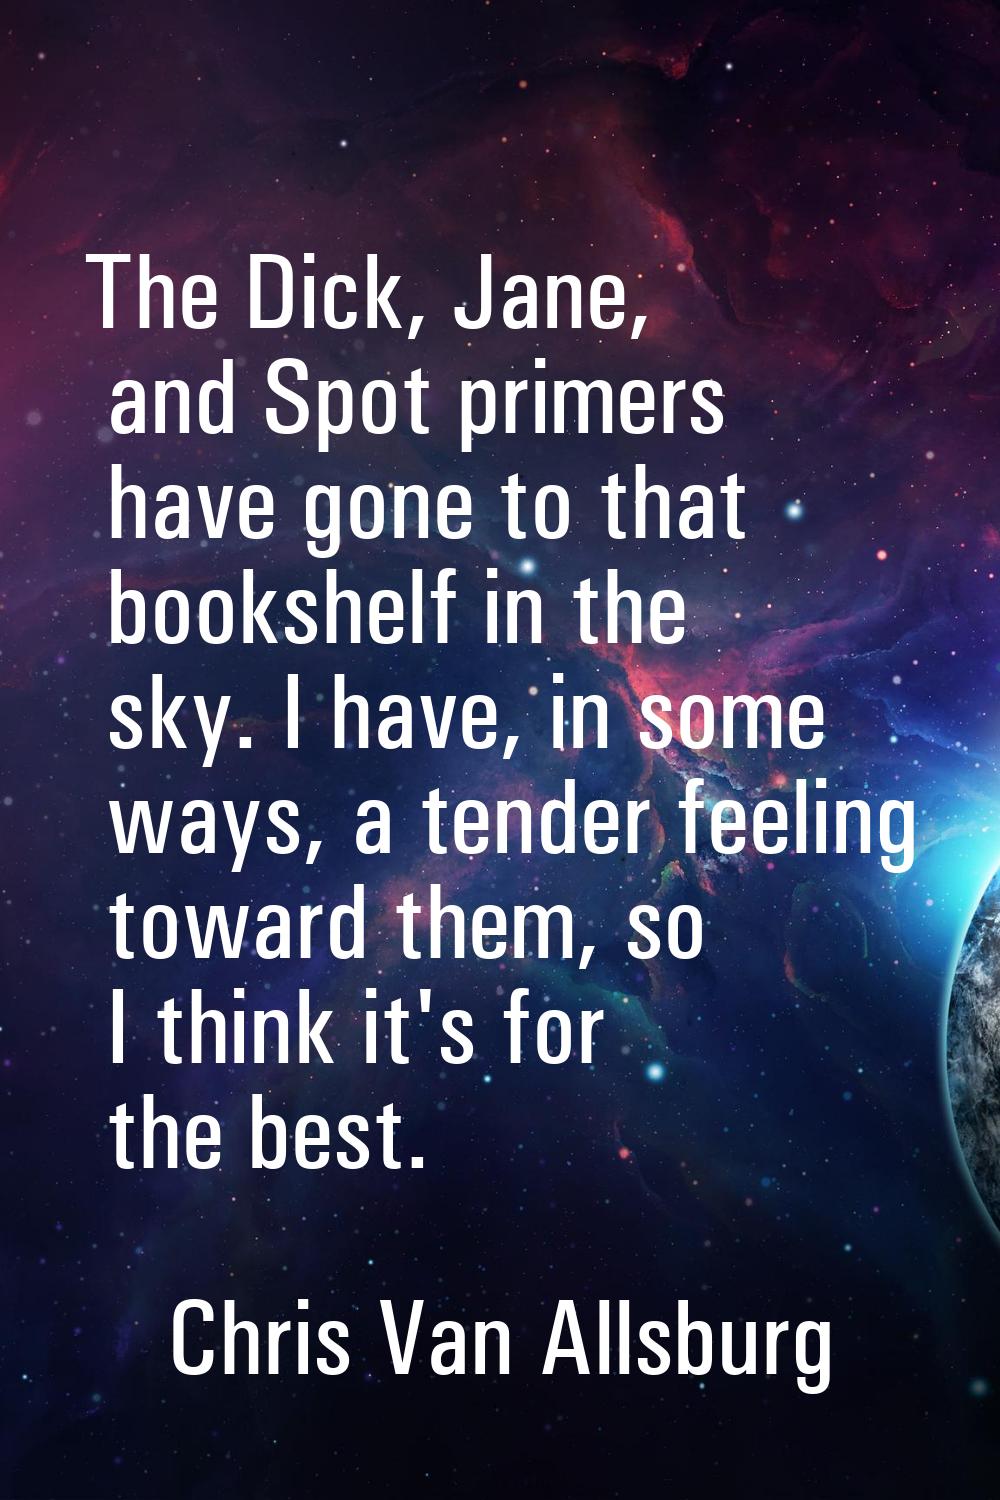 The Dick, Jane, and Spot primers have gone to that bookshelf in the sky. I have, in some ways, a te